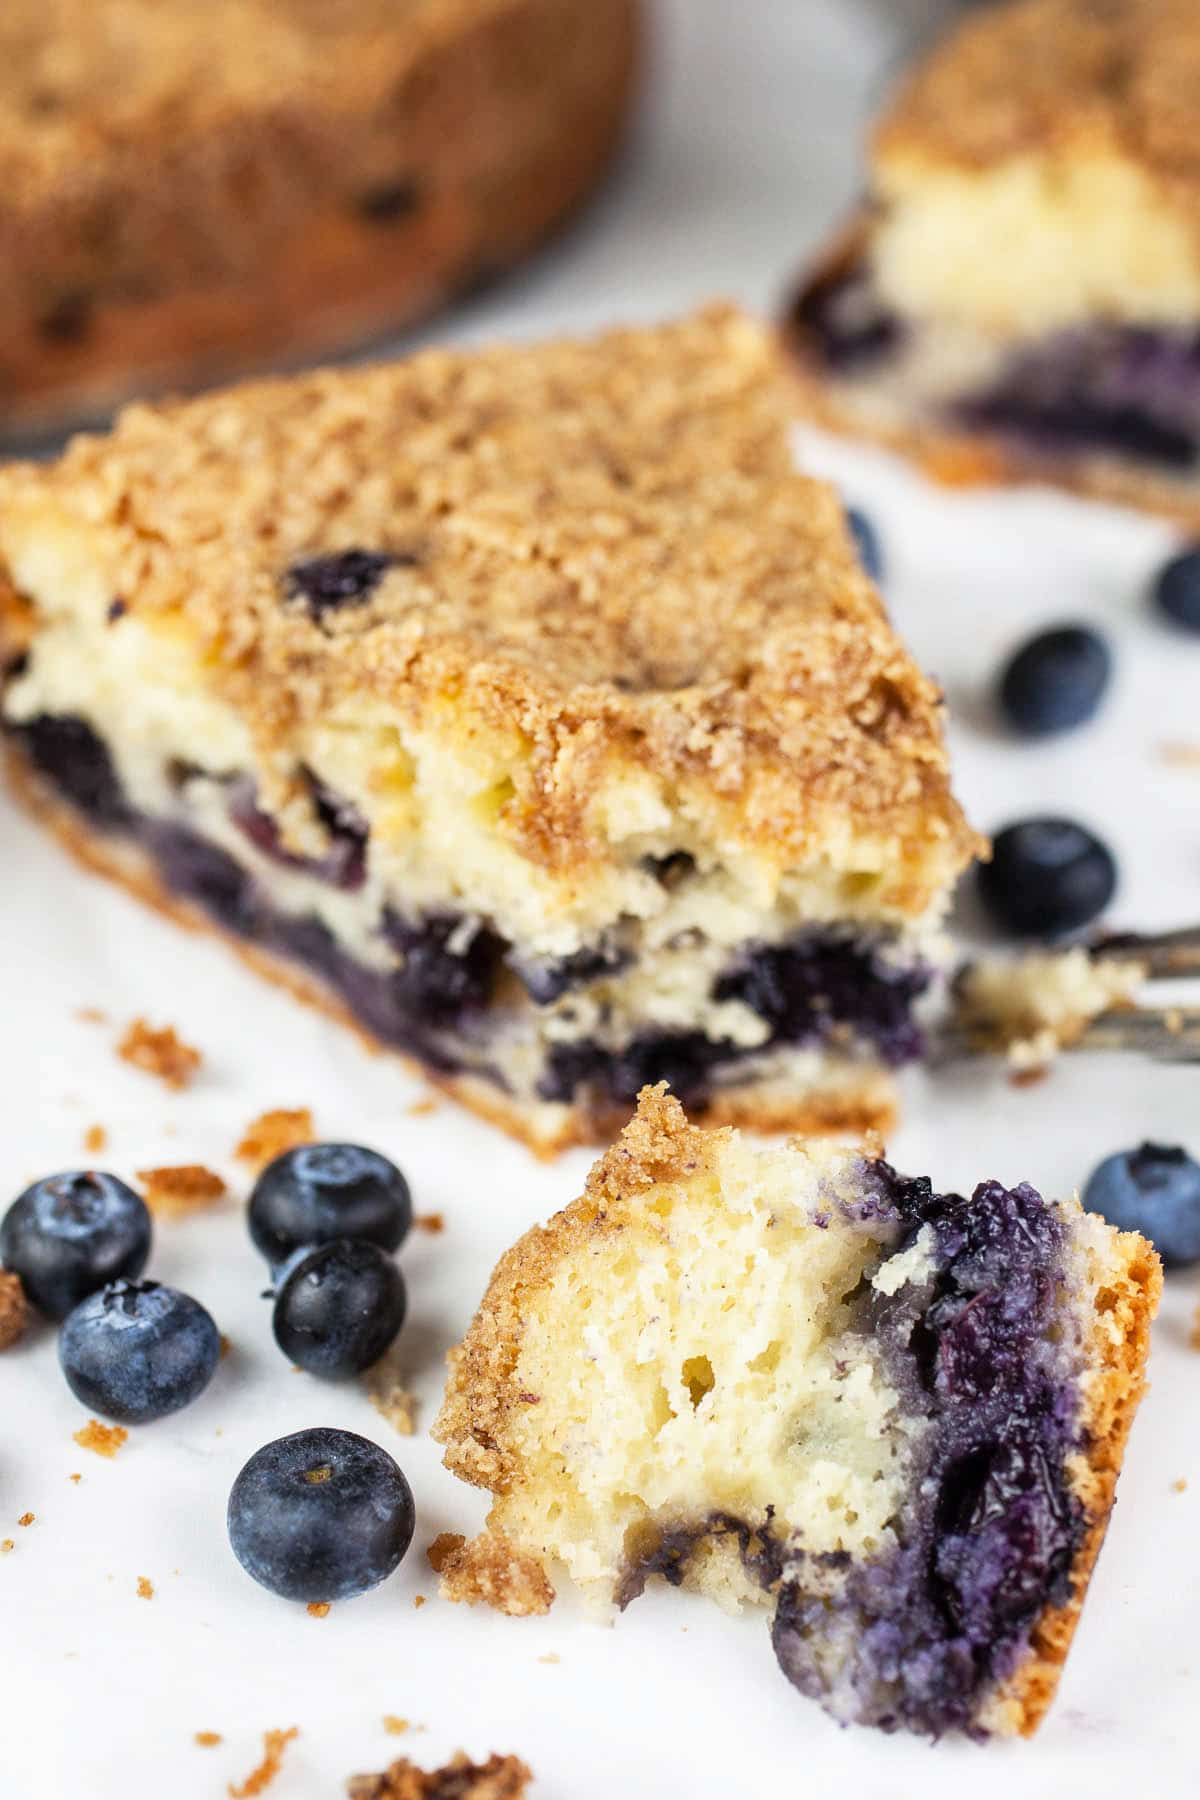 Piece of blueberry coffee cake on white surface with fresh blueberries.